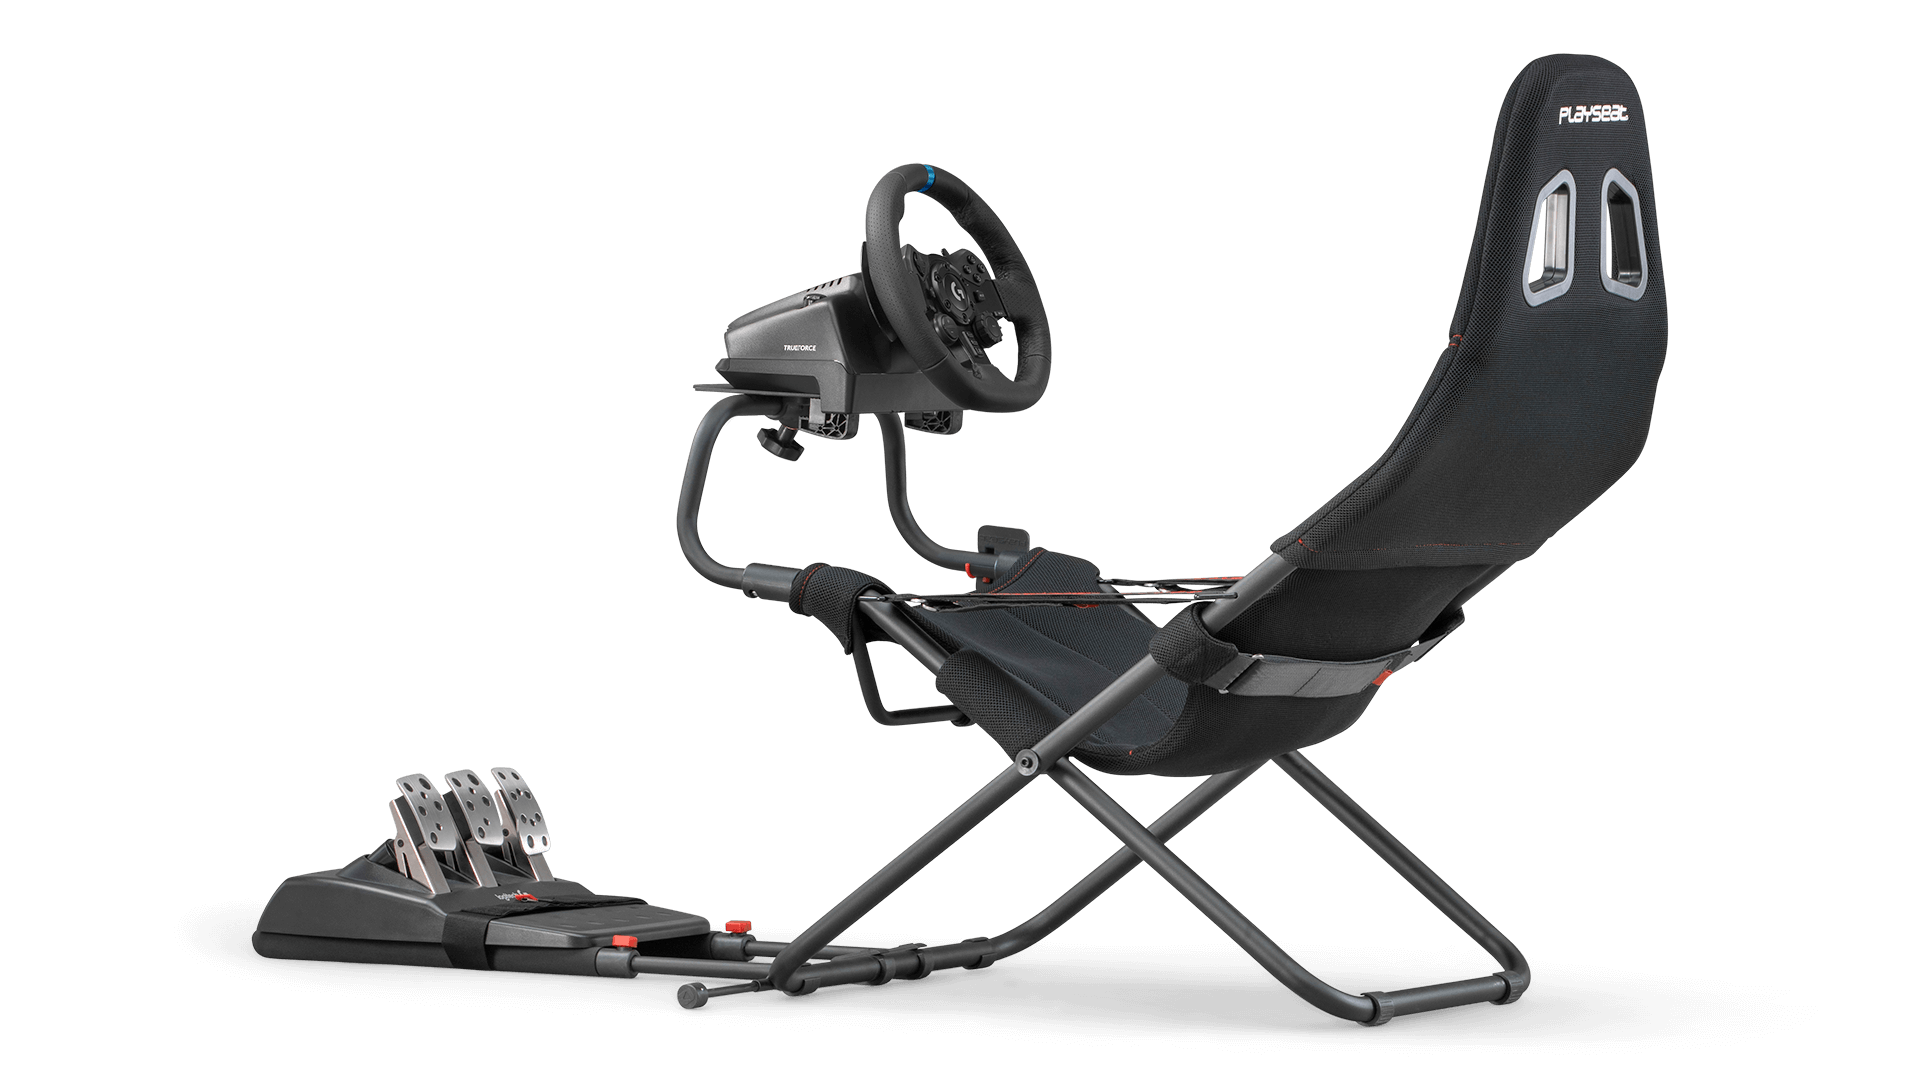 playseat-challenge-black-actifit-racing-seat-back-angle-view-logitech-1920x1080-1.png